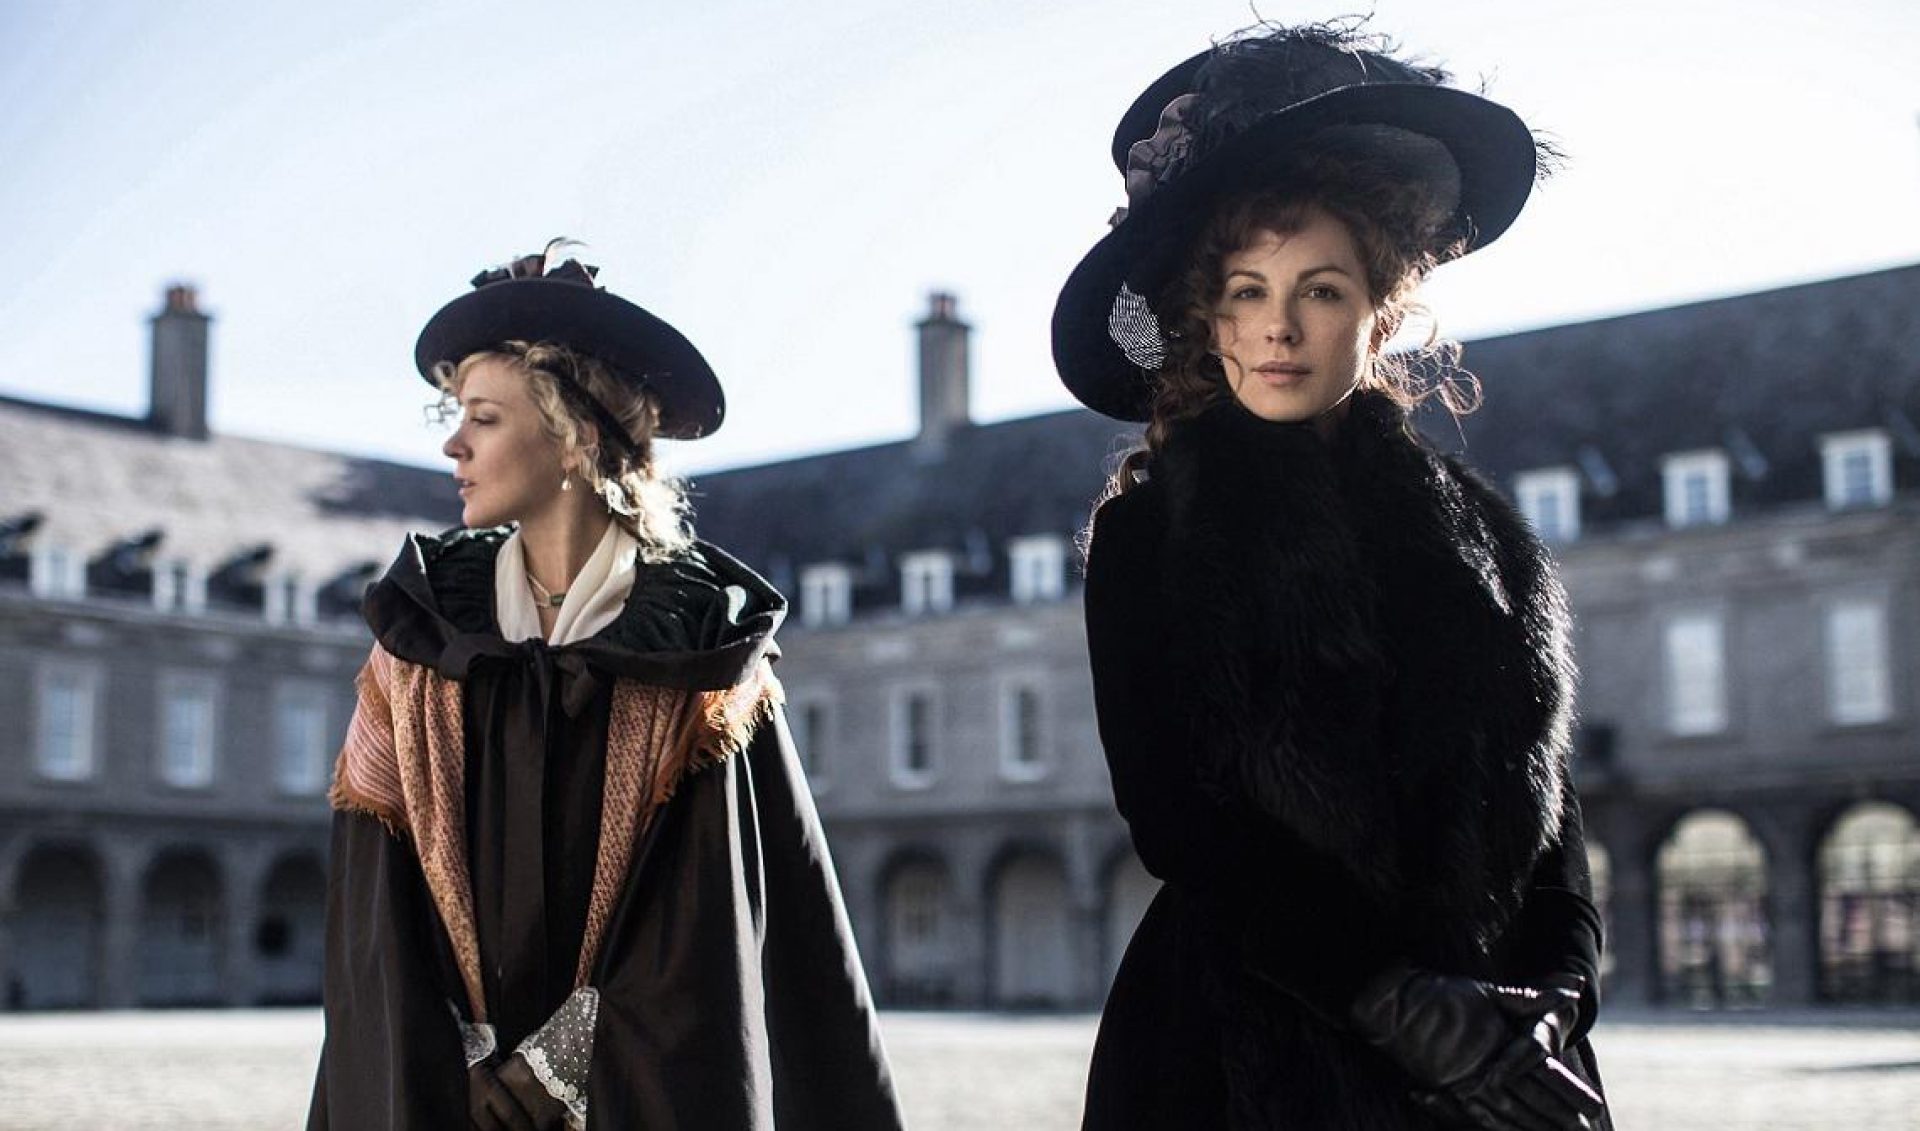 Amazon, Roadside Attractions Obtain Distribution Rights To Jane Austen-Based Film ‘Love And Friendship’